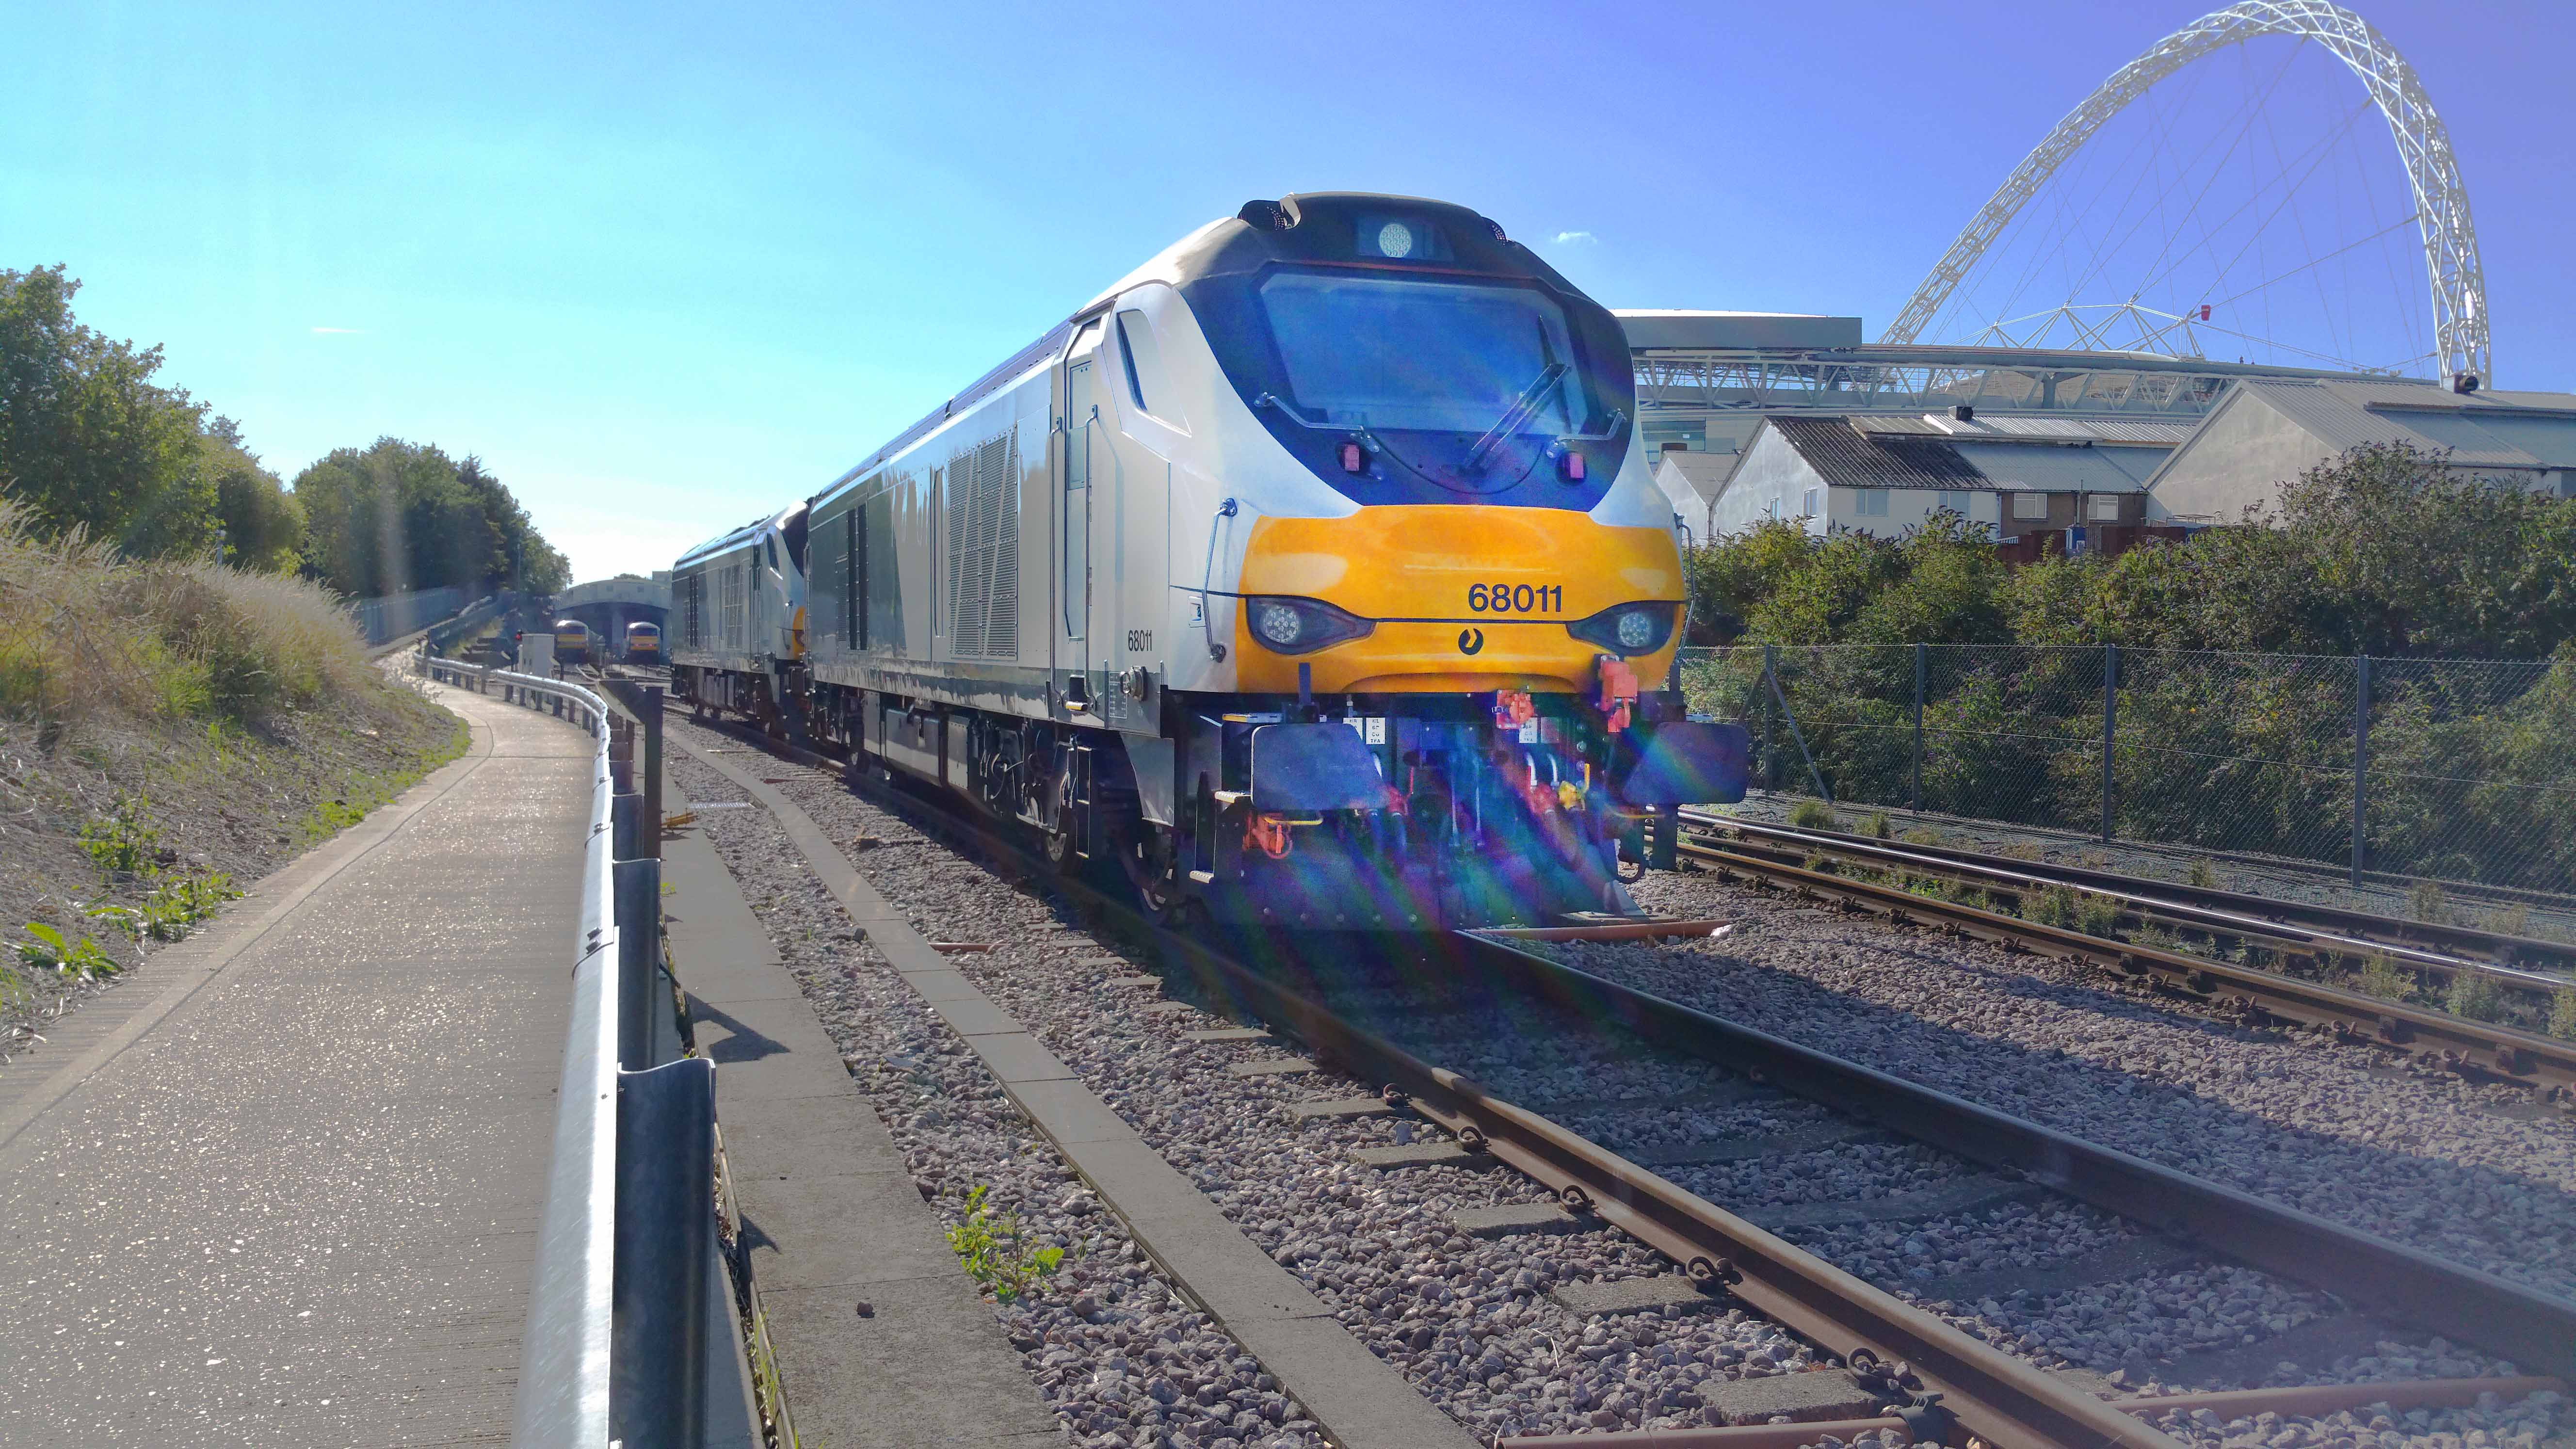 Chiltern Railways provides thousands of seats for fans travelling to the Carabao Cup Final